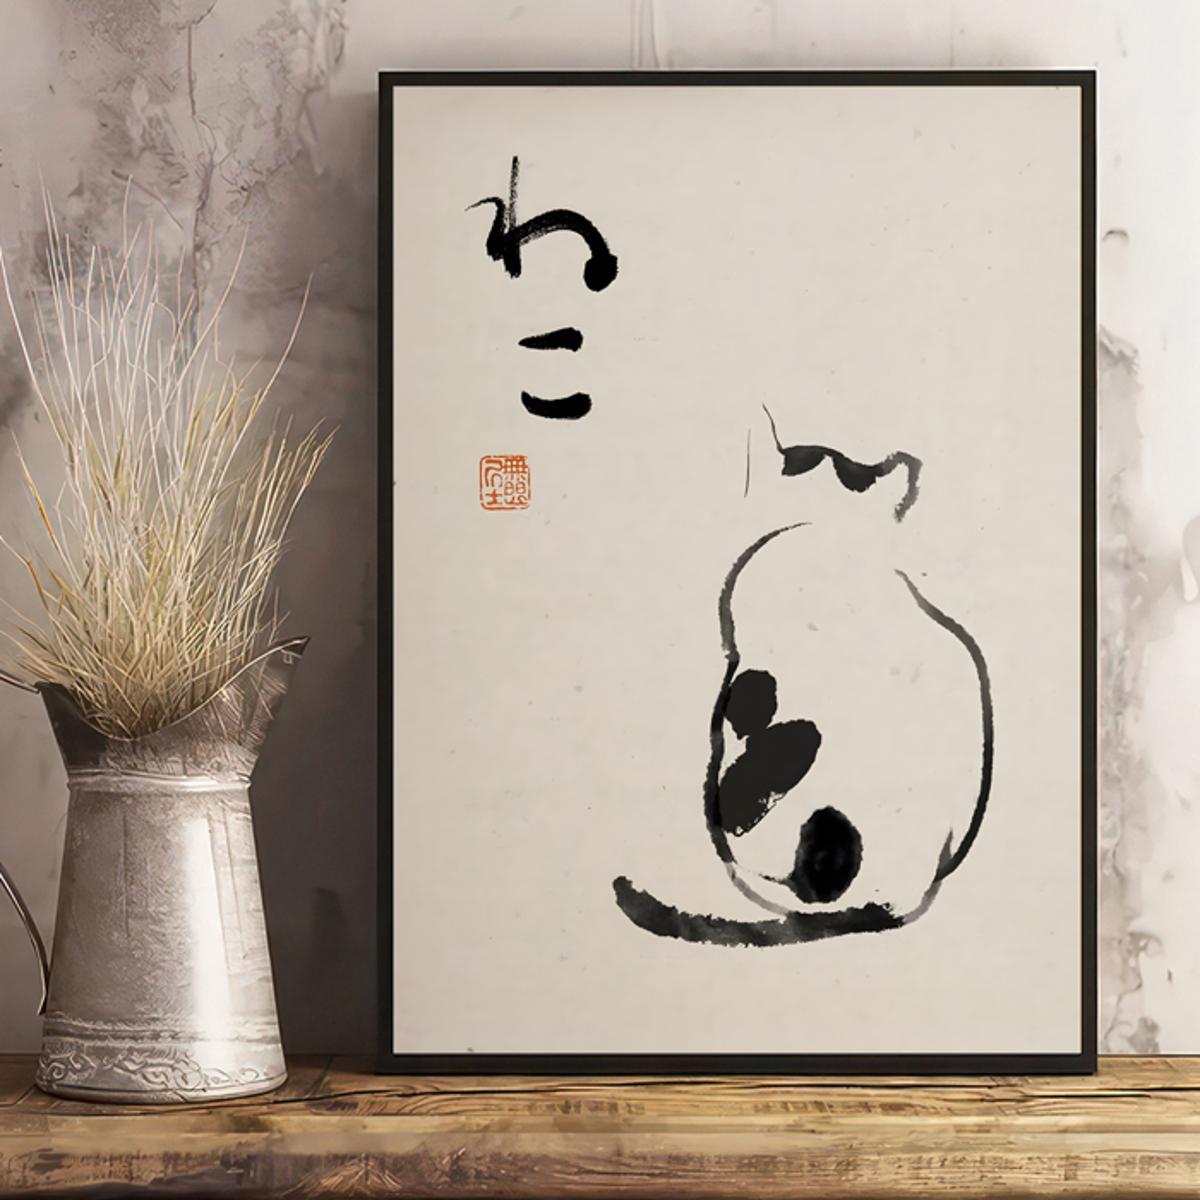 Japanese Word Posters Online - Shop Unique Metal Prints, Pictures,  Paintings - page 7